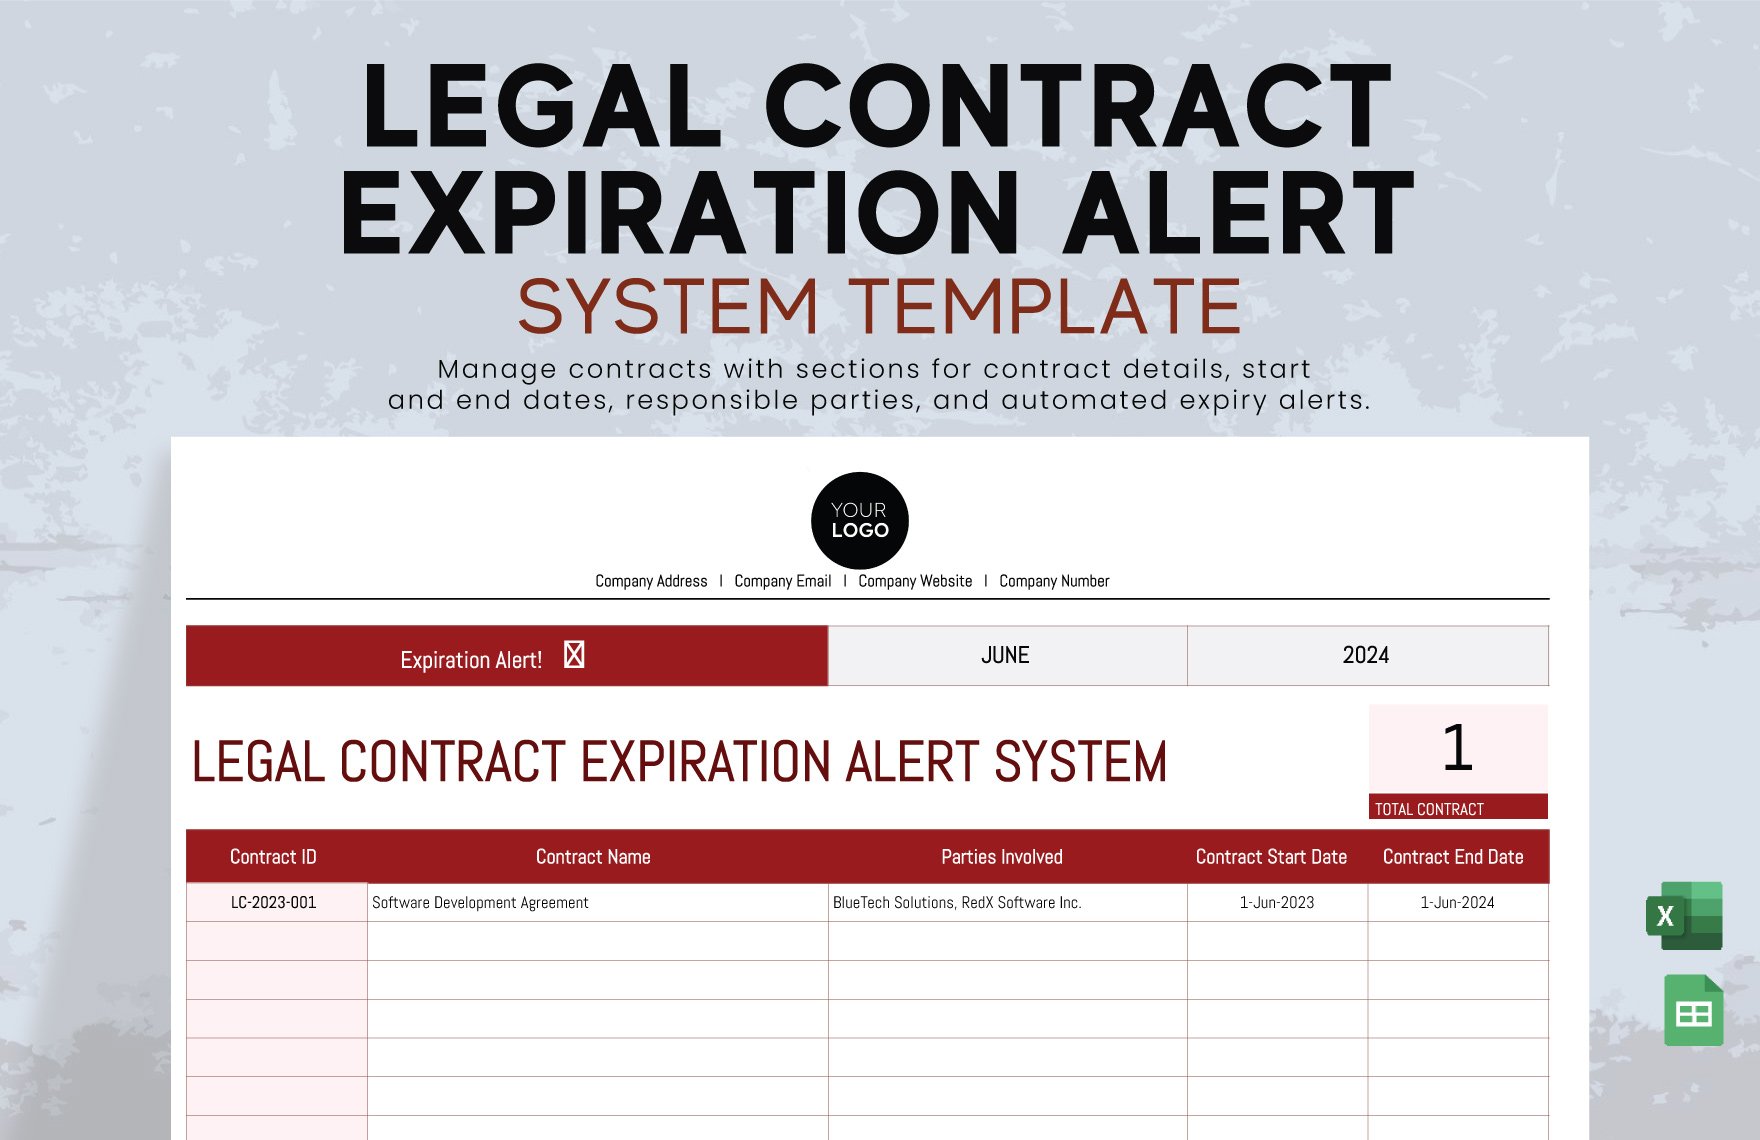 Legal Contract Expiration Alert System Template in Excel, Google Sheets